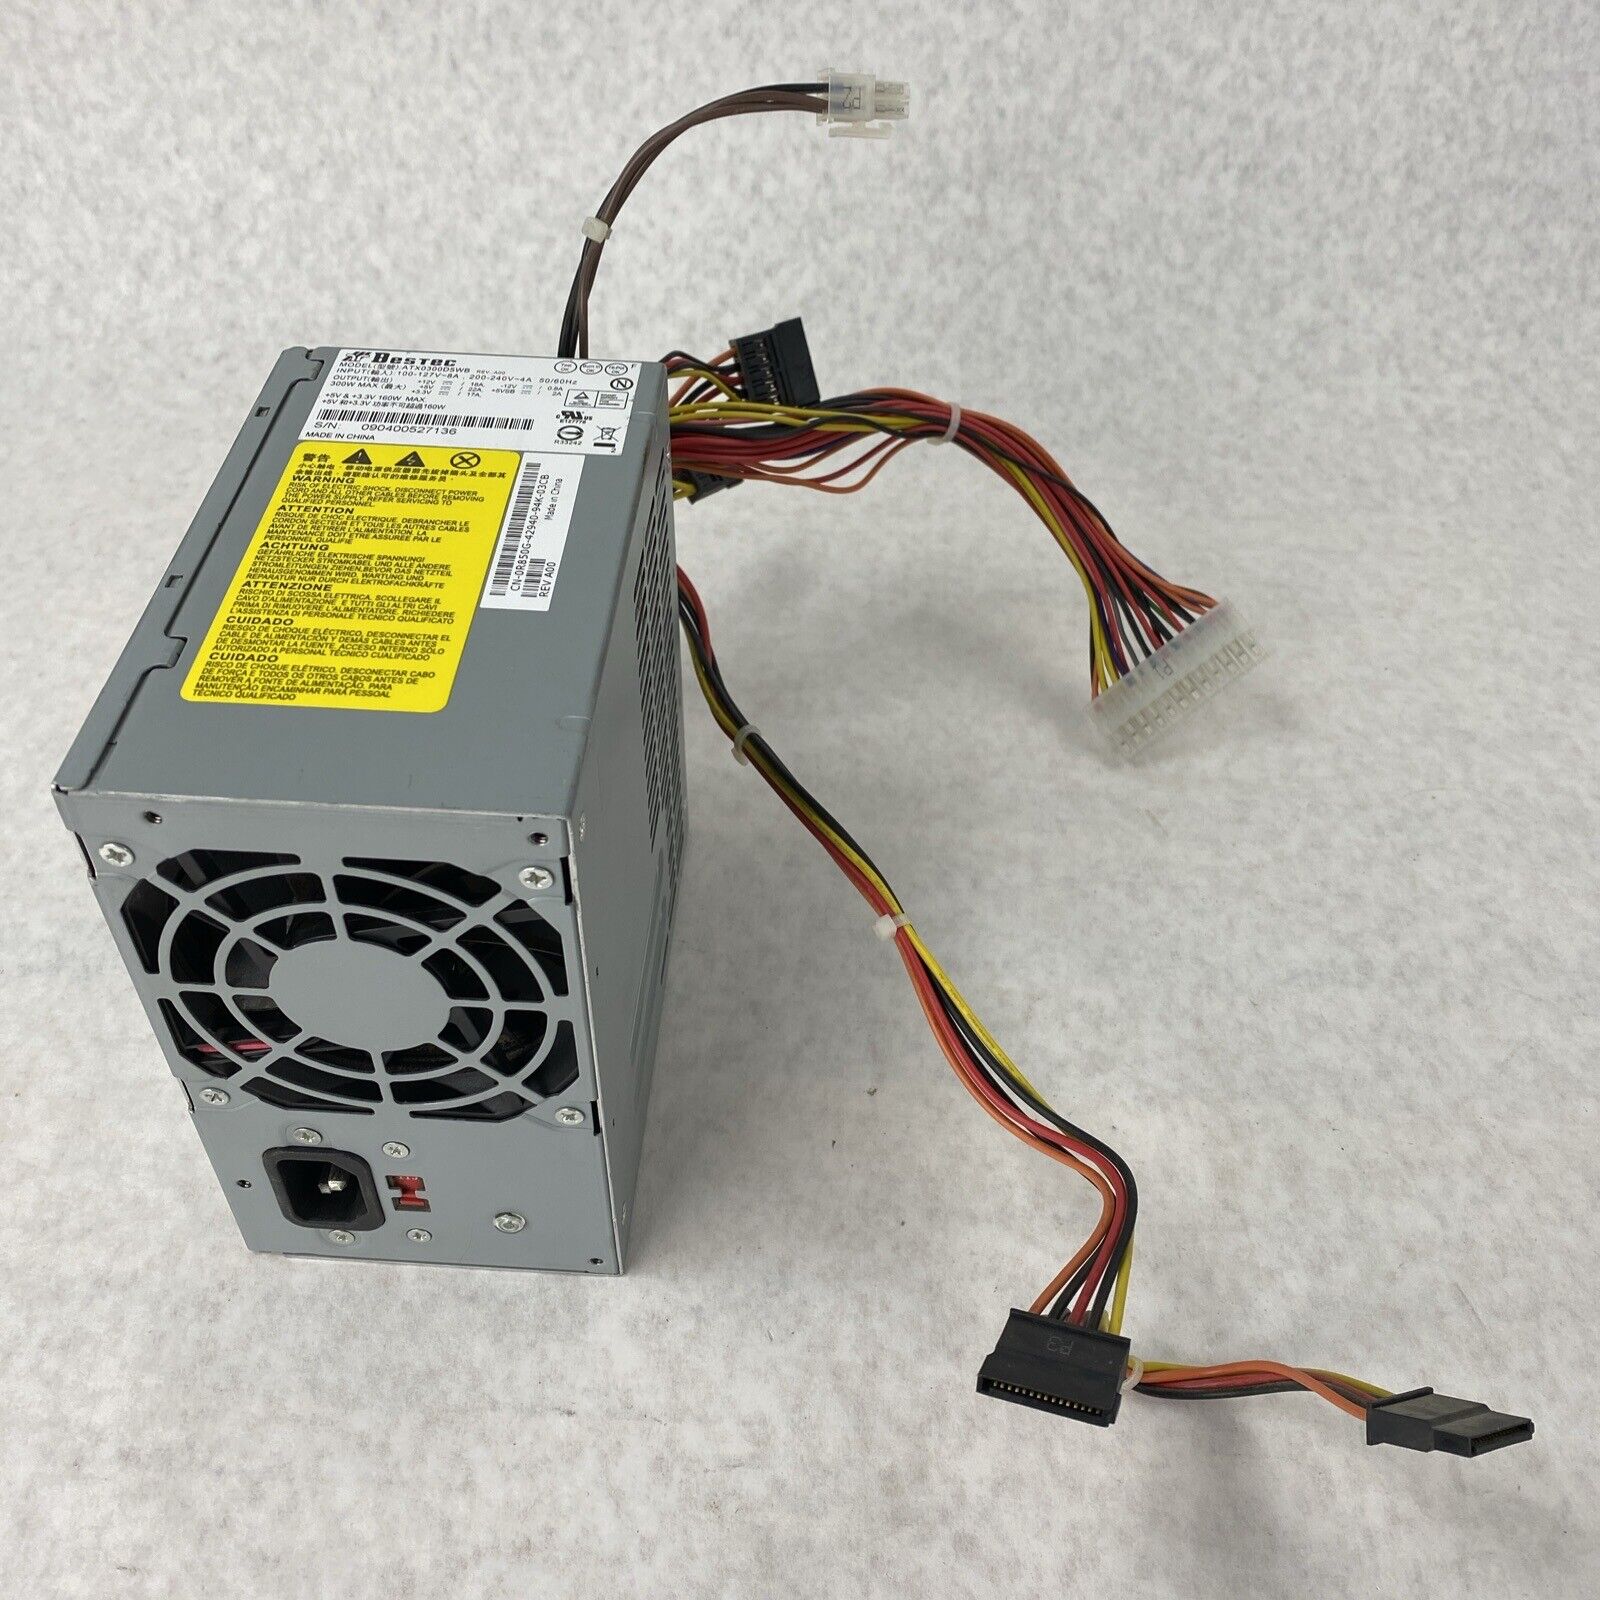 Bestec 0R850G 0XW600 ATX0300D5WB 300W Power Supply for Dell Inspiron 530